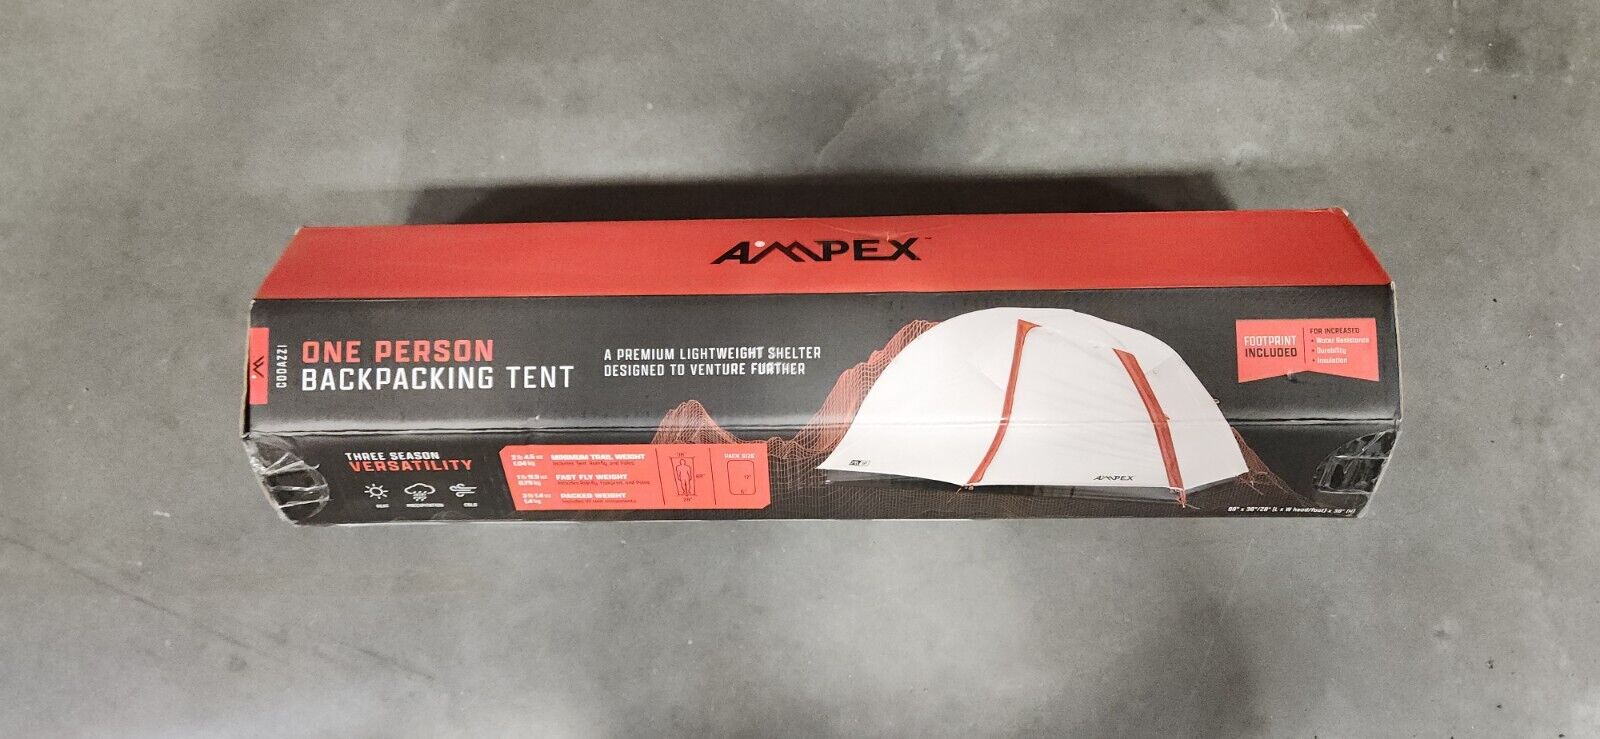 Ampex Codazzi One Person Backpacking Tent Lightweight W/Footprint Brand New